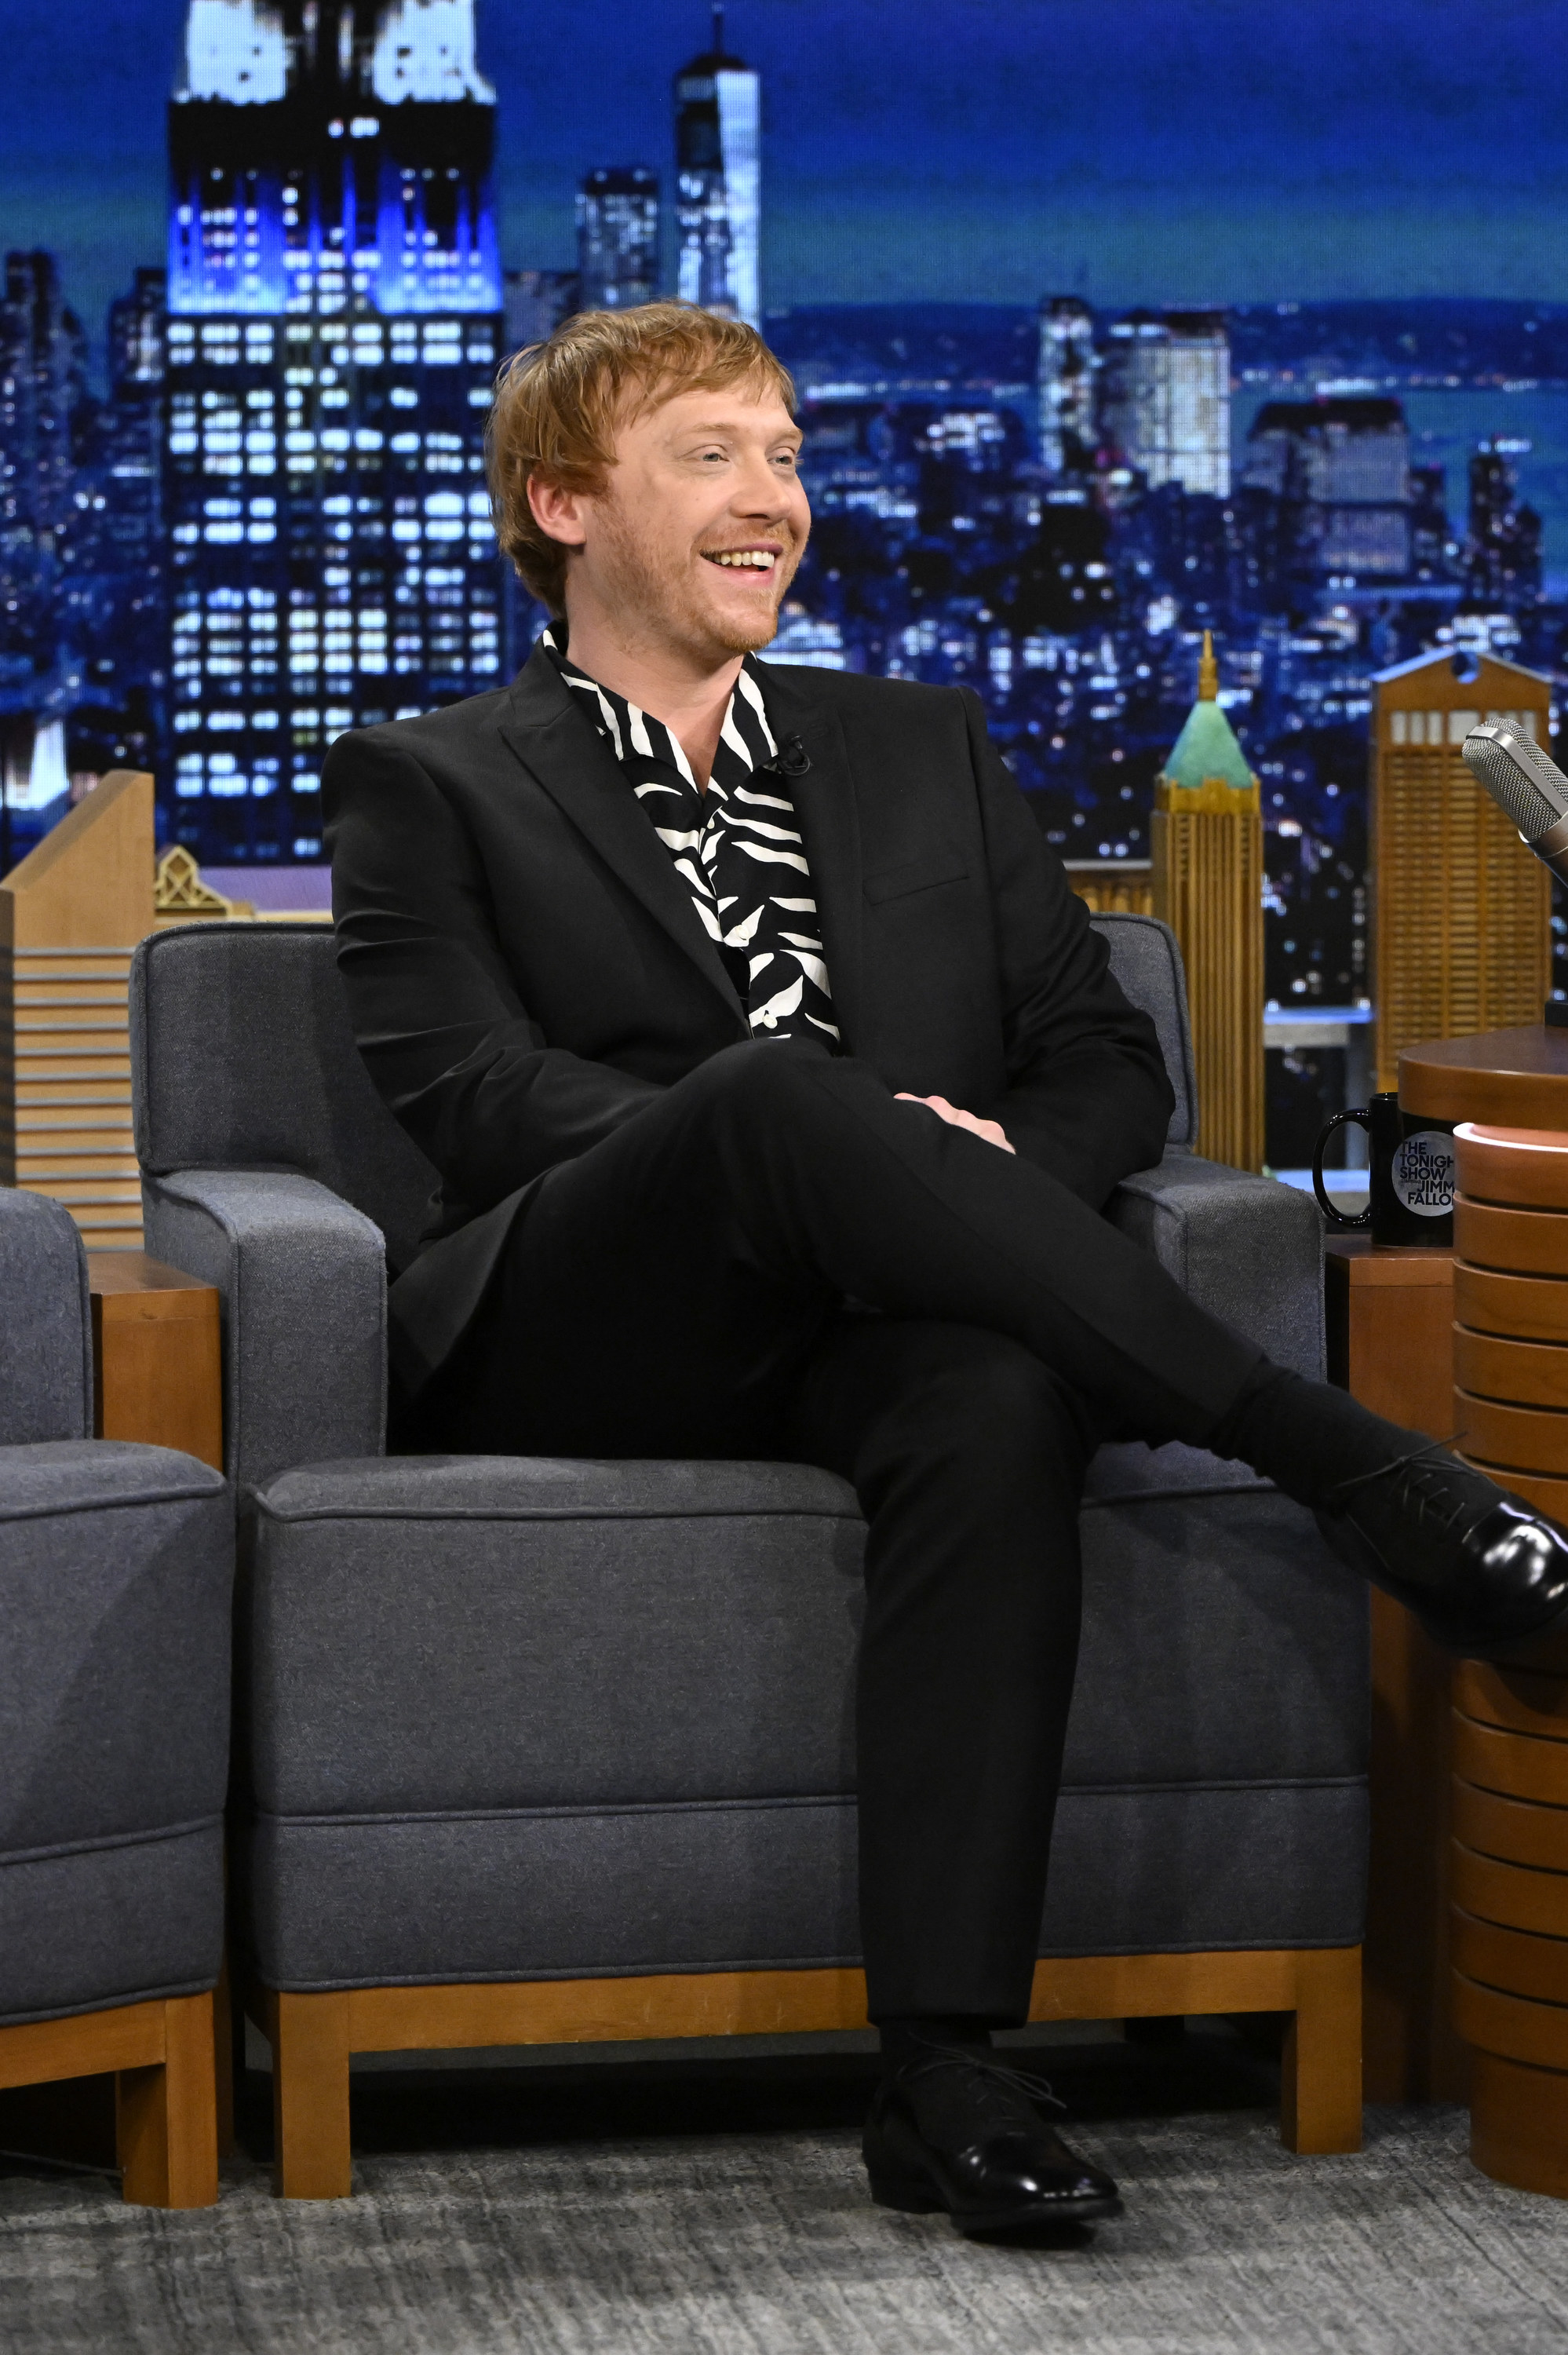 Rupert smiling in a chair during a talk show interview